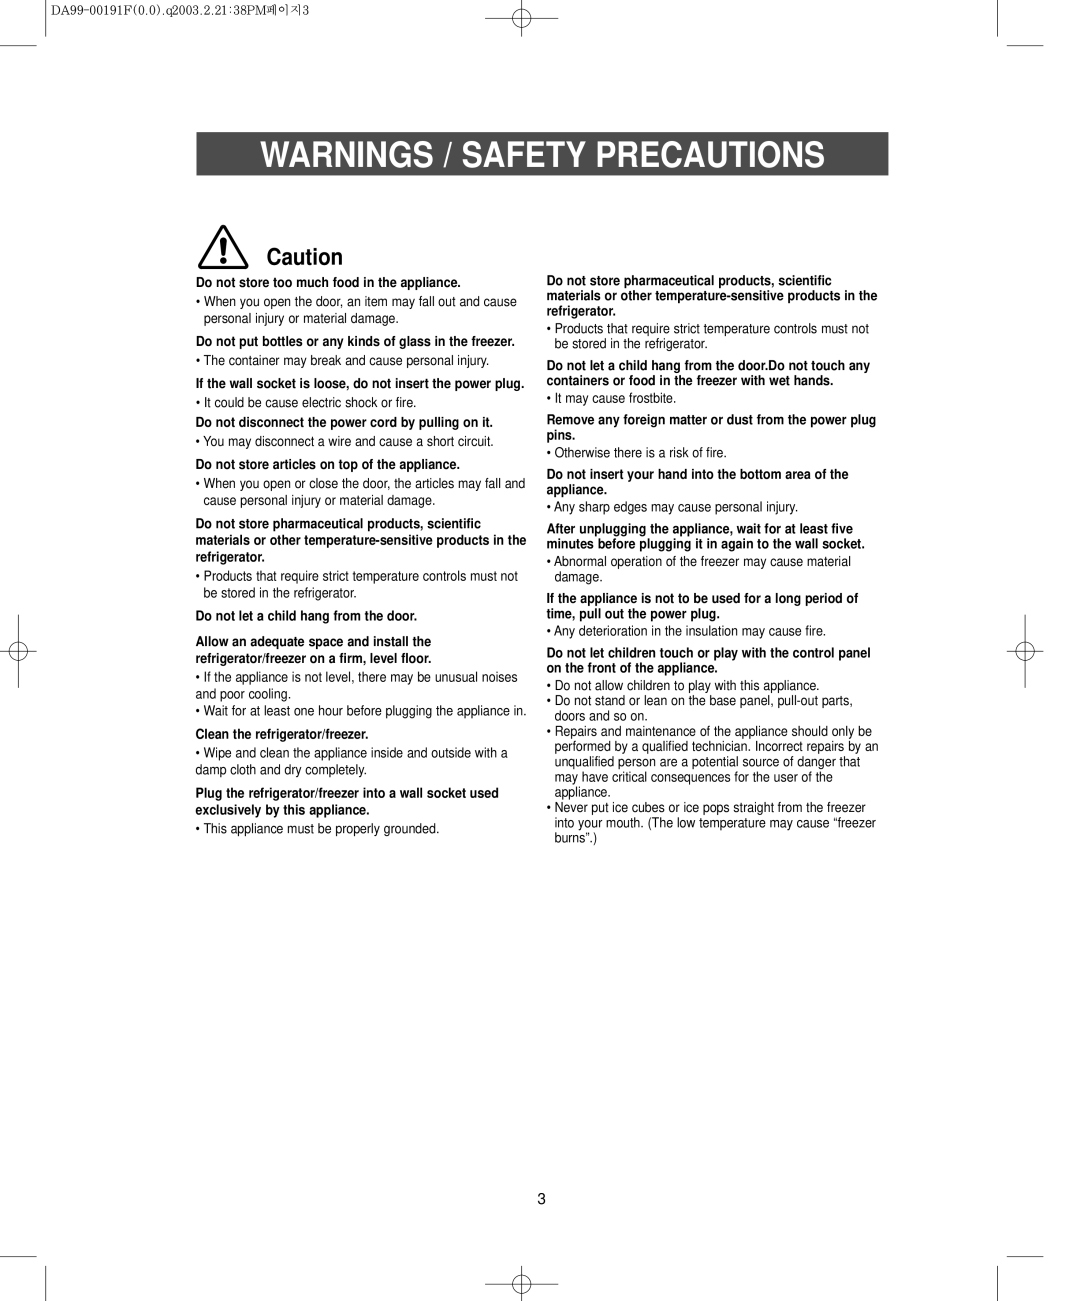 Samsung RB1844SW, RB1844SL, RB2044SW, RB2044SL Warnings / Safety Precautions, Do not store too much food in the appliance 